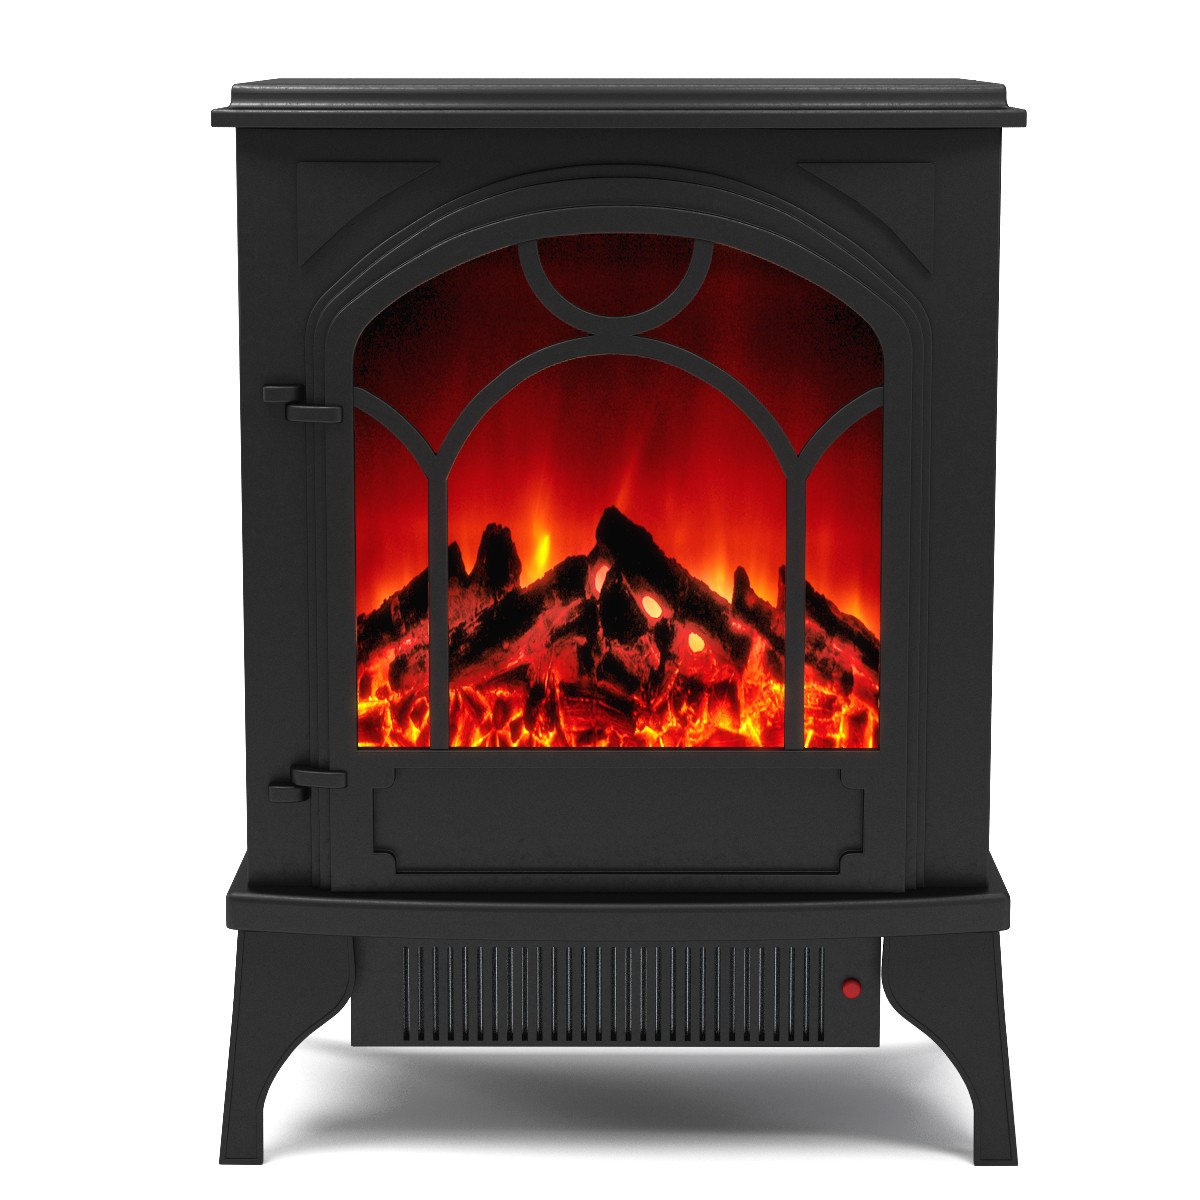 Regal Flame Apollo Electric Fireplace Free Standing Portable Space Heater Stove Better than Wood Fireplaces, Gas Logs, Wall Moun